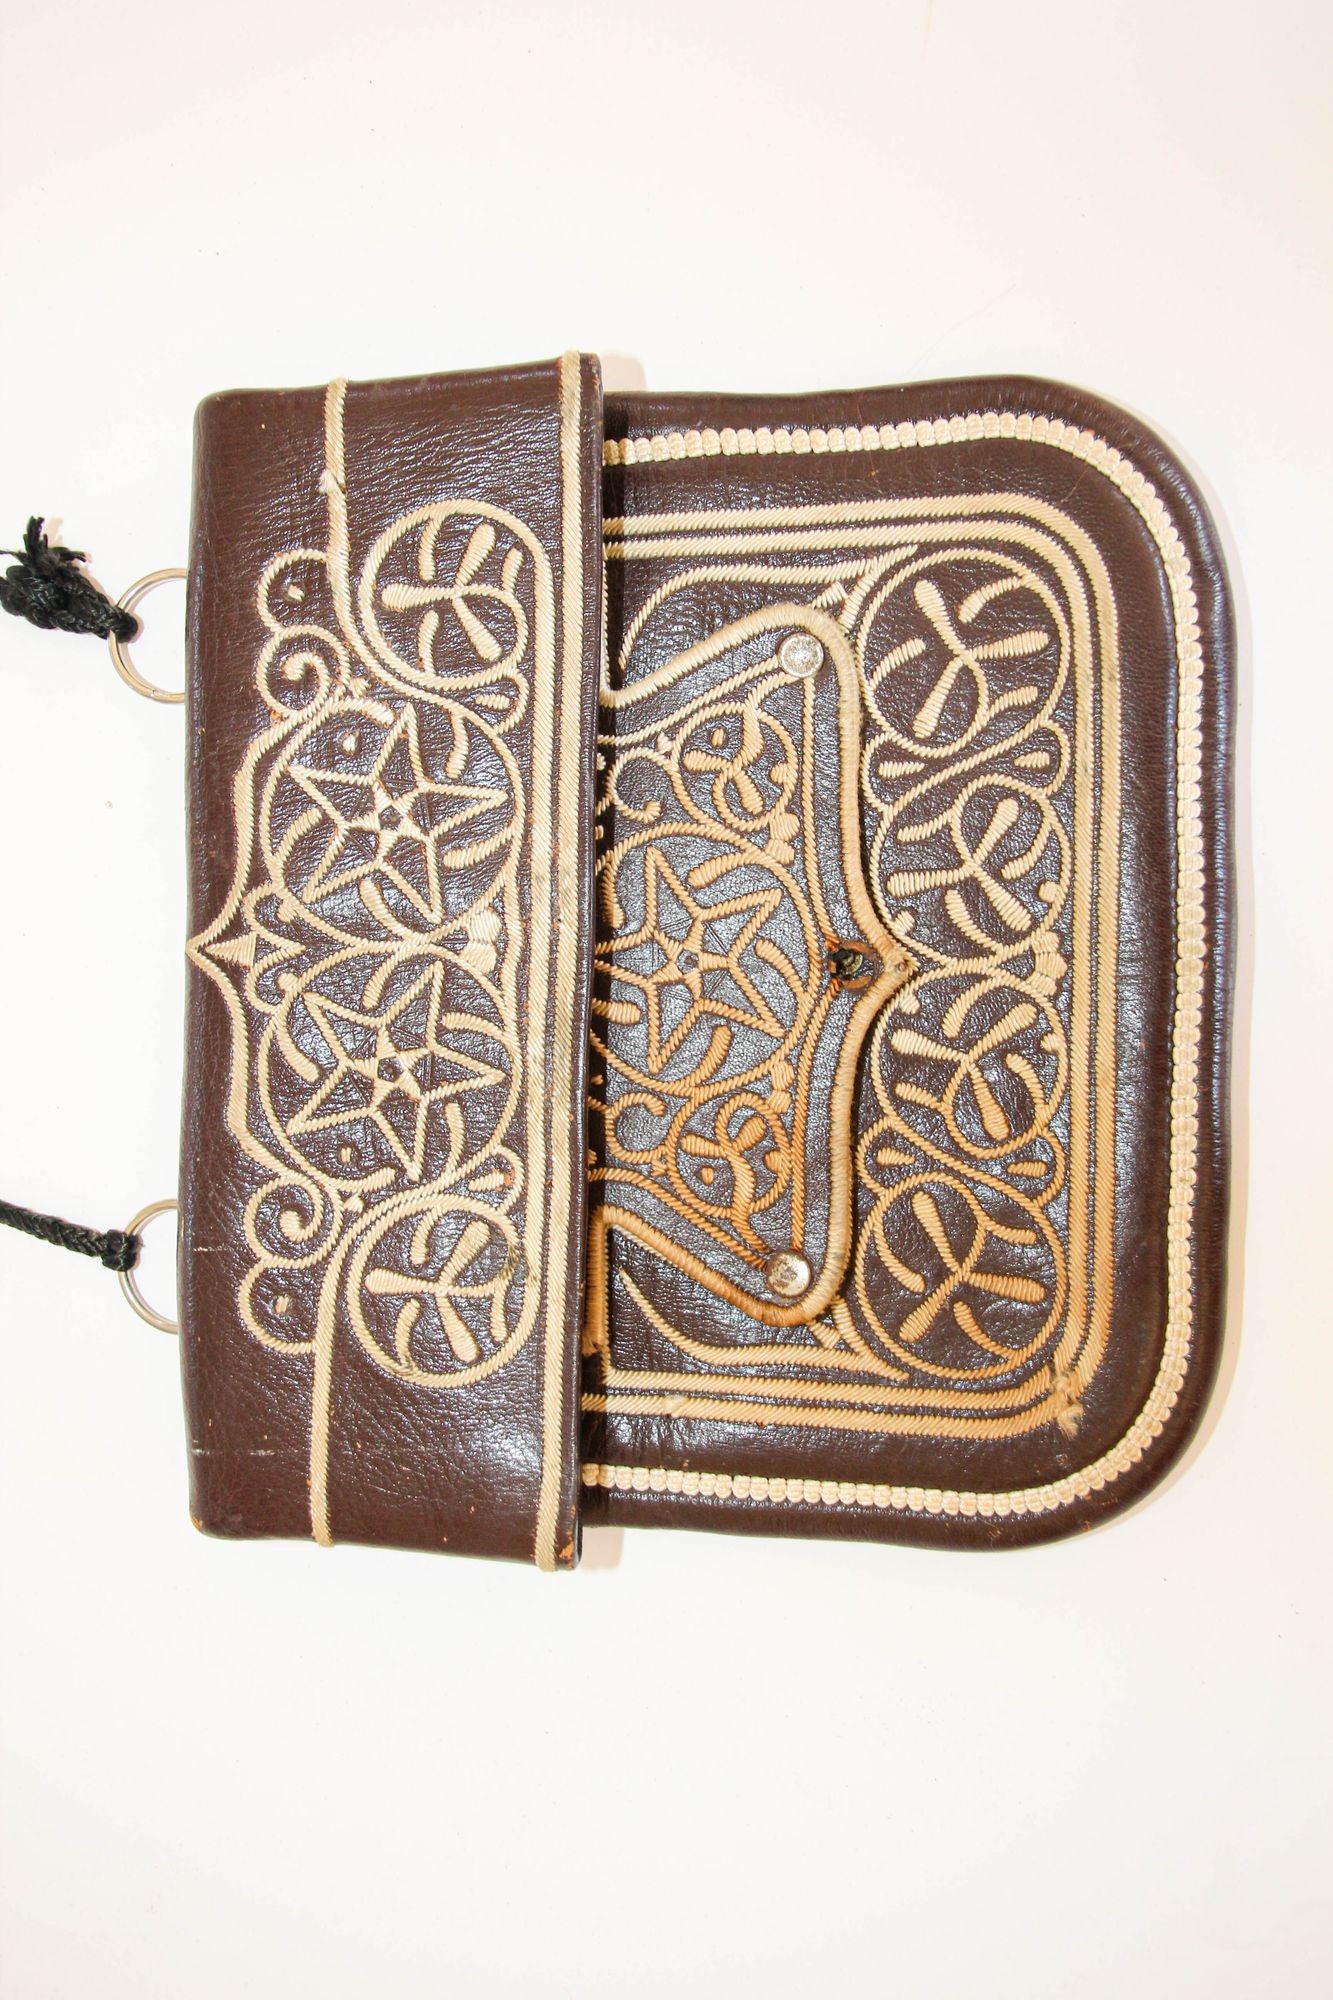 hand tooled leather book cover